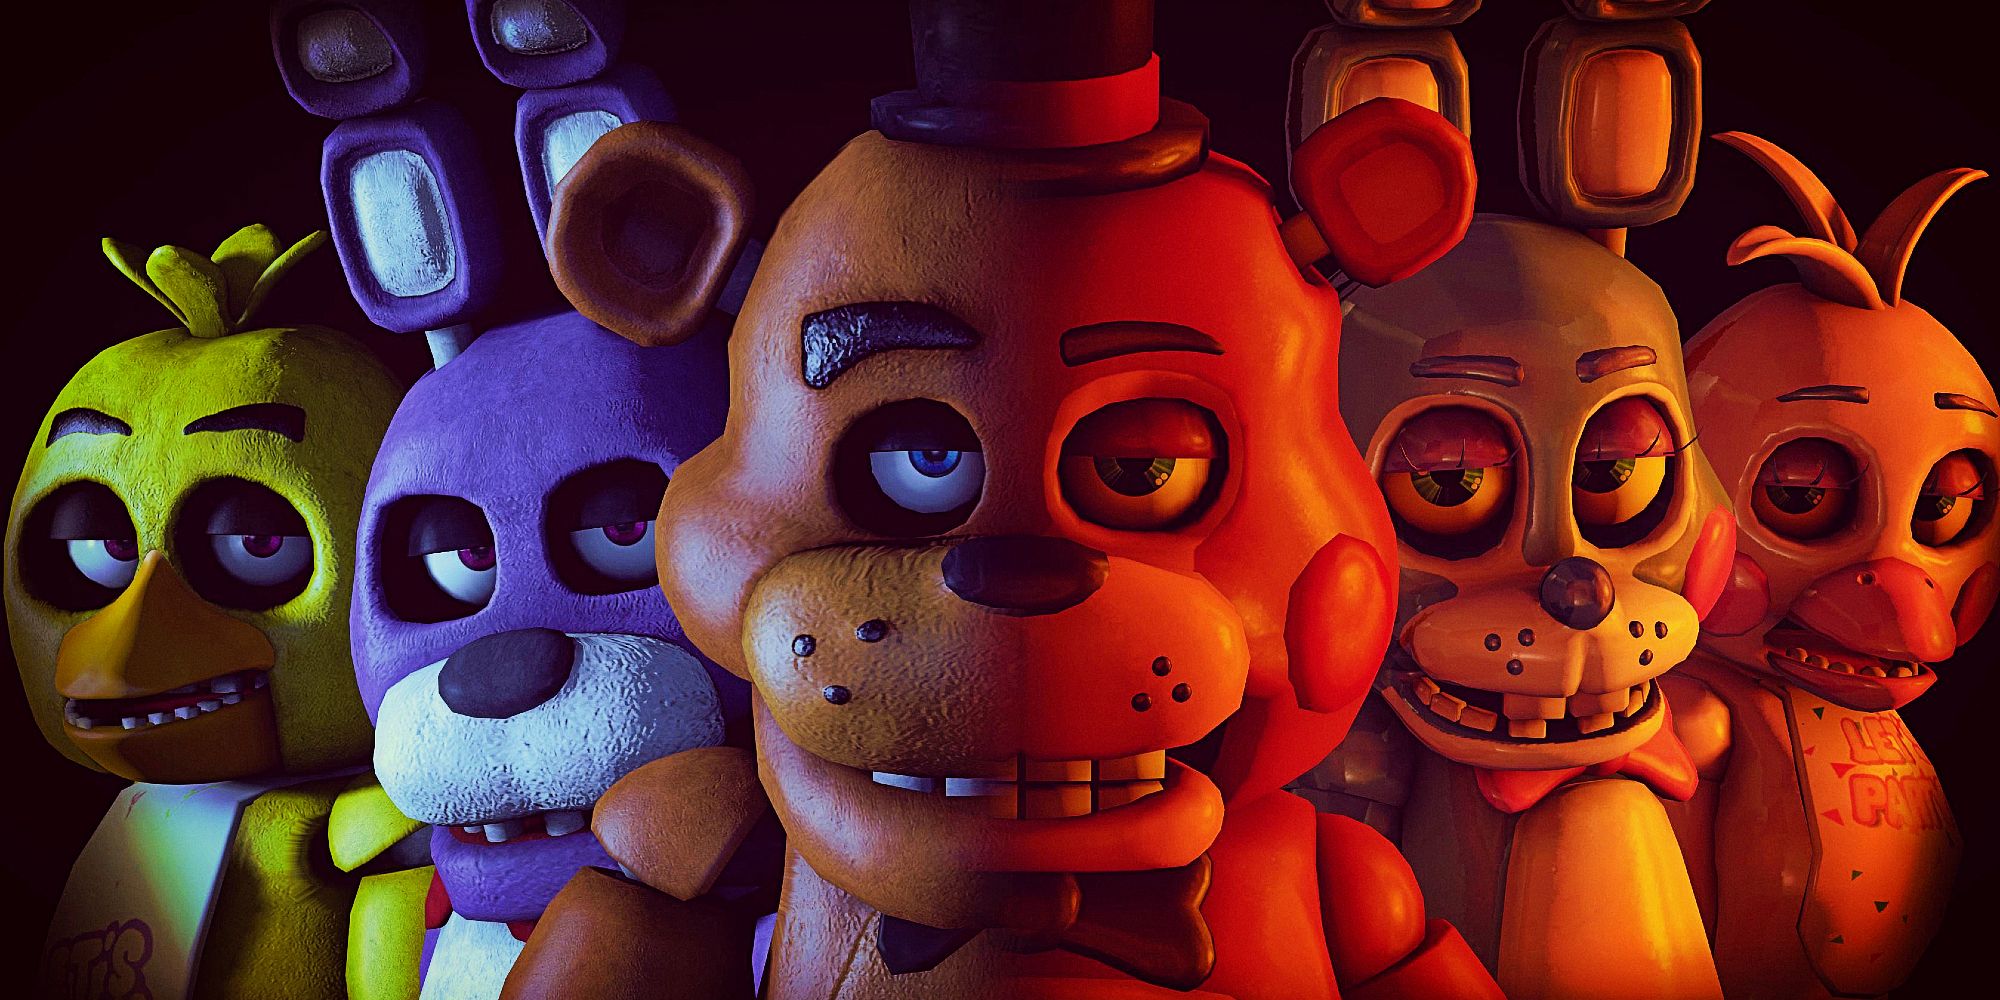 A Collage Of Stills I took From The New Fnaf Movie Trailer. New Shots Of  The Animatronics, Characters, And Various Different Locations And Scenes. :  r/fivenightsatfreddys